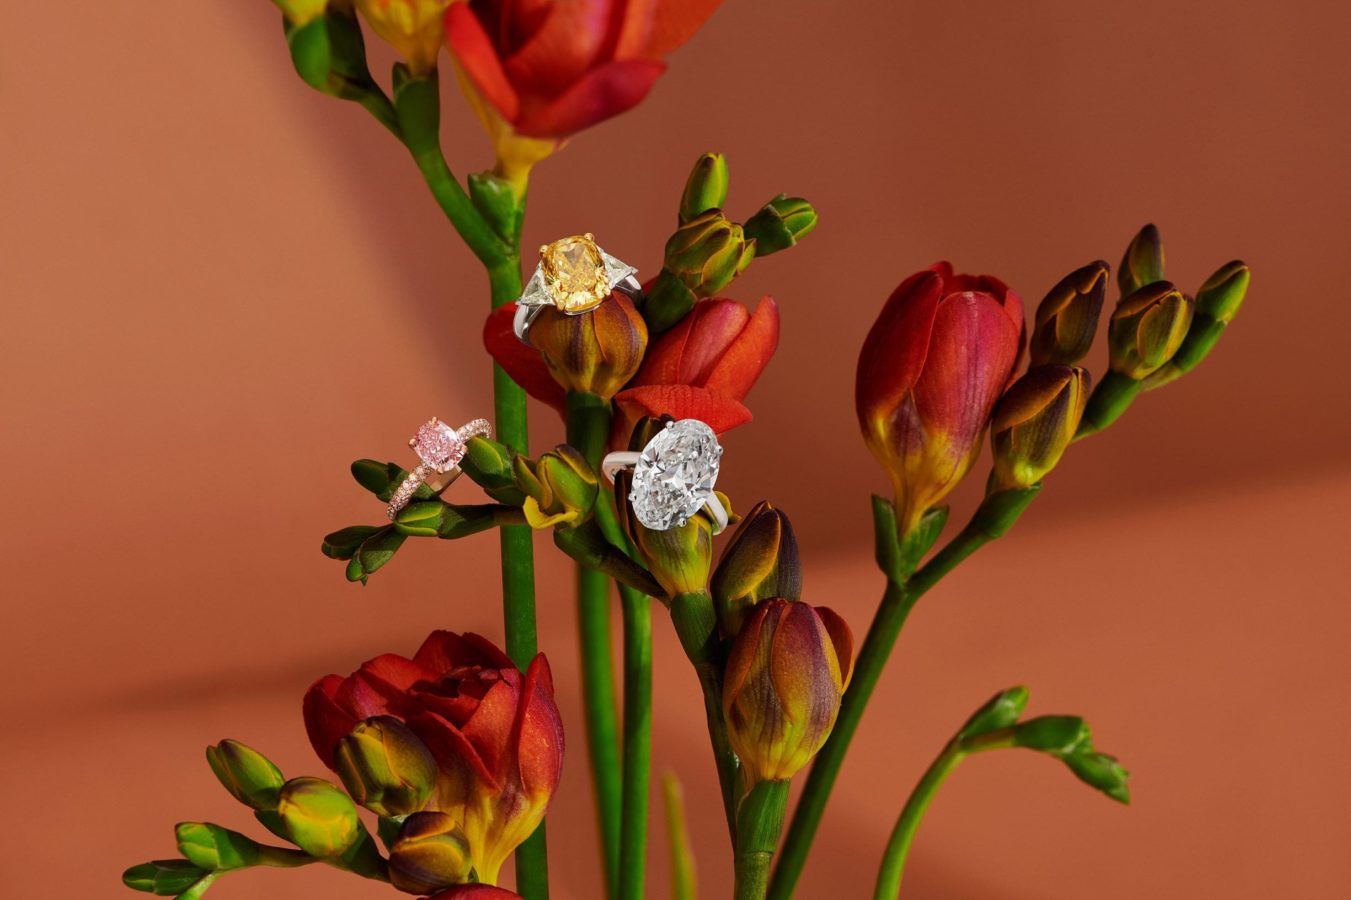 How De Beers is Leading the Way in Ethical Jewellery and Sustainability